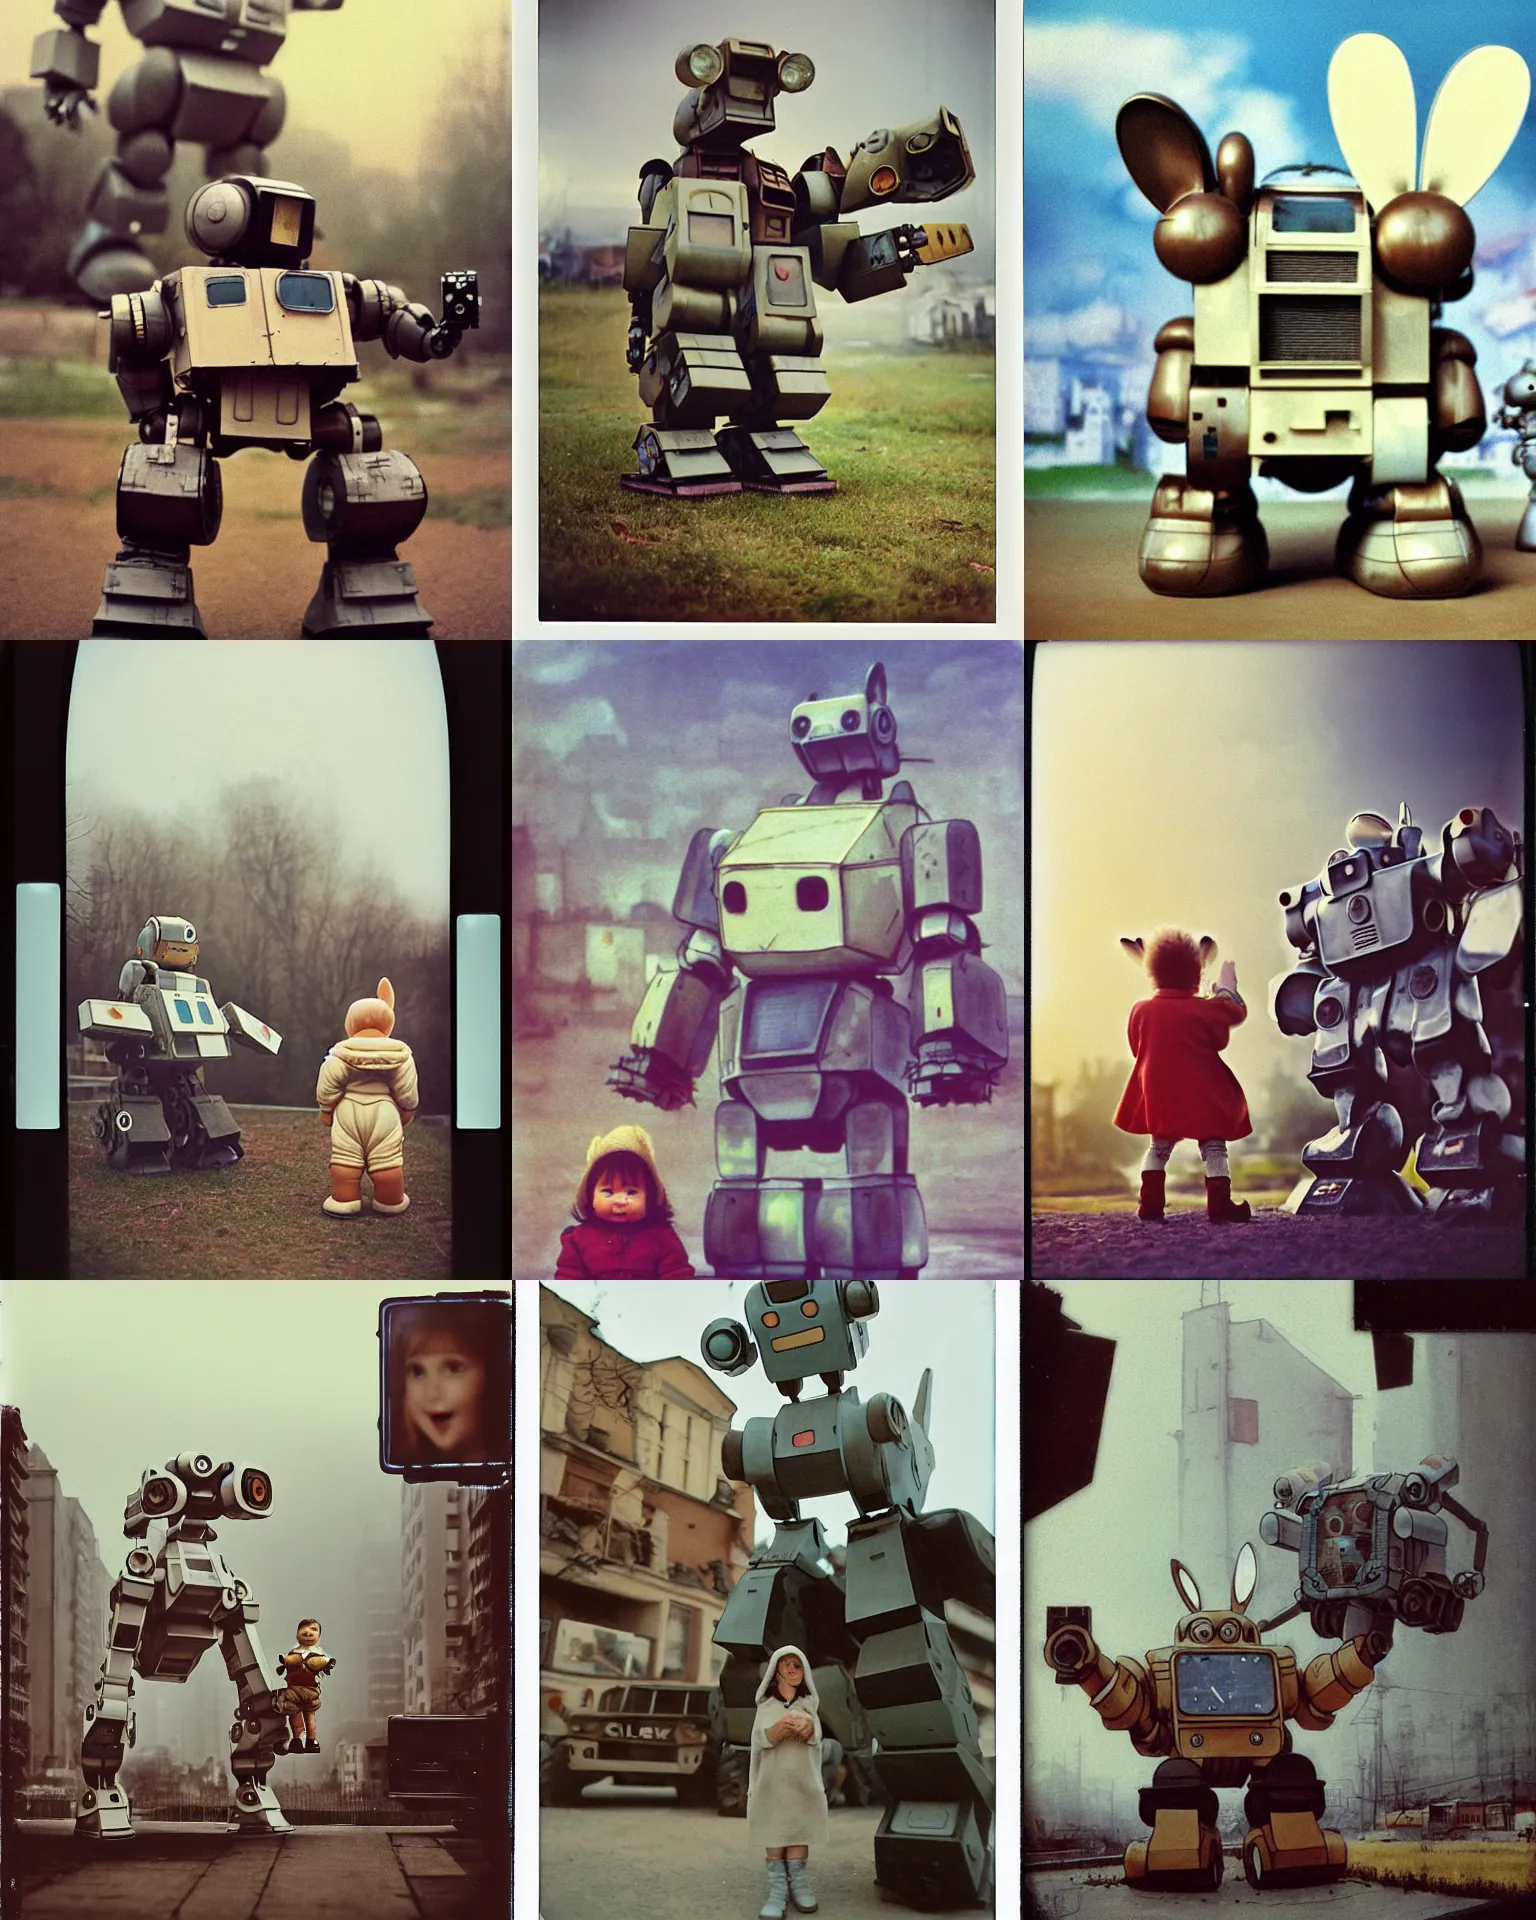 Prompt: giant oversized baby cute chubby battle robot mech with giant rabbit ears s as giant baby on village, Cinematic focus, russian block in background , Polaroid photo, vintage, neutral colors, soft lights, foggy ,by Steve Hanks, by Serov Valentin, by lisa yuskavage, by Andrei Tarkovsky